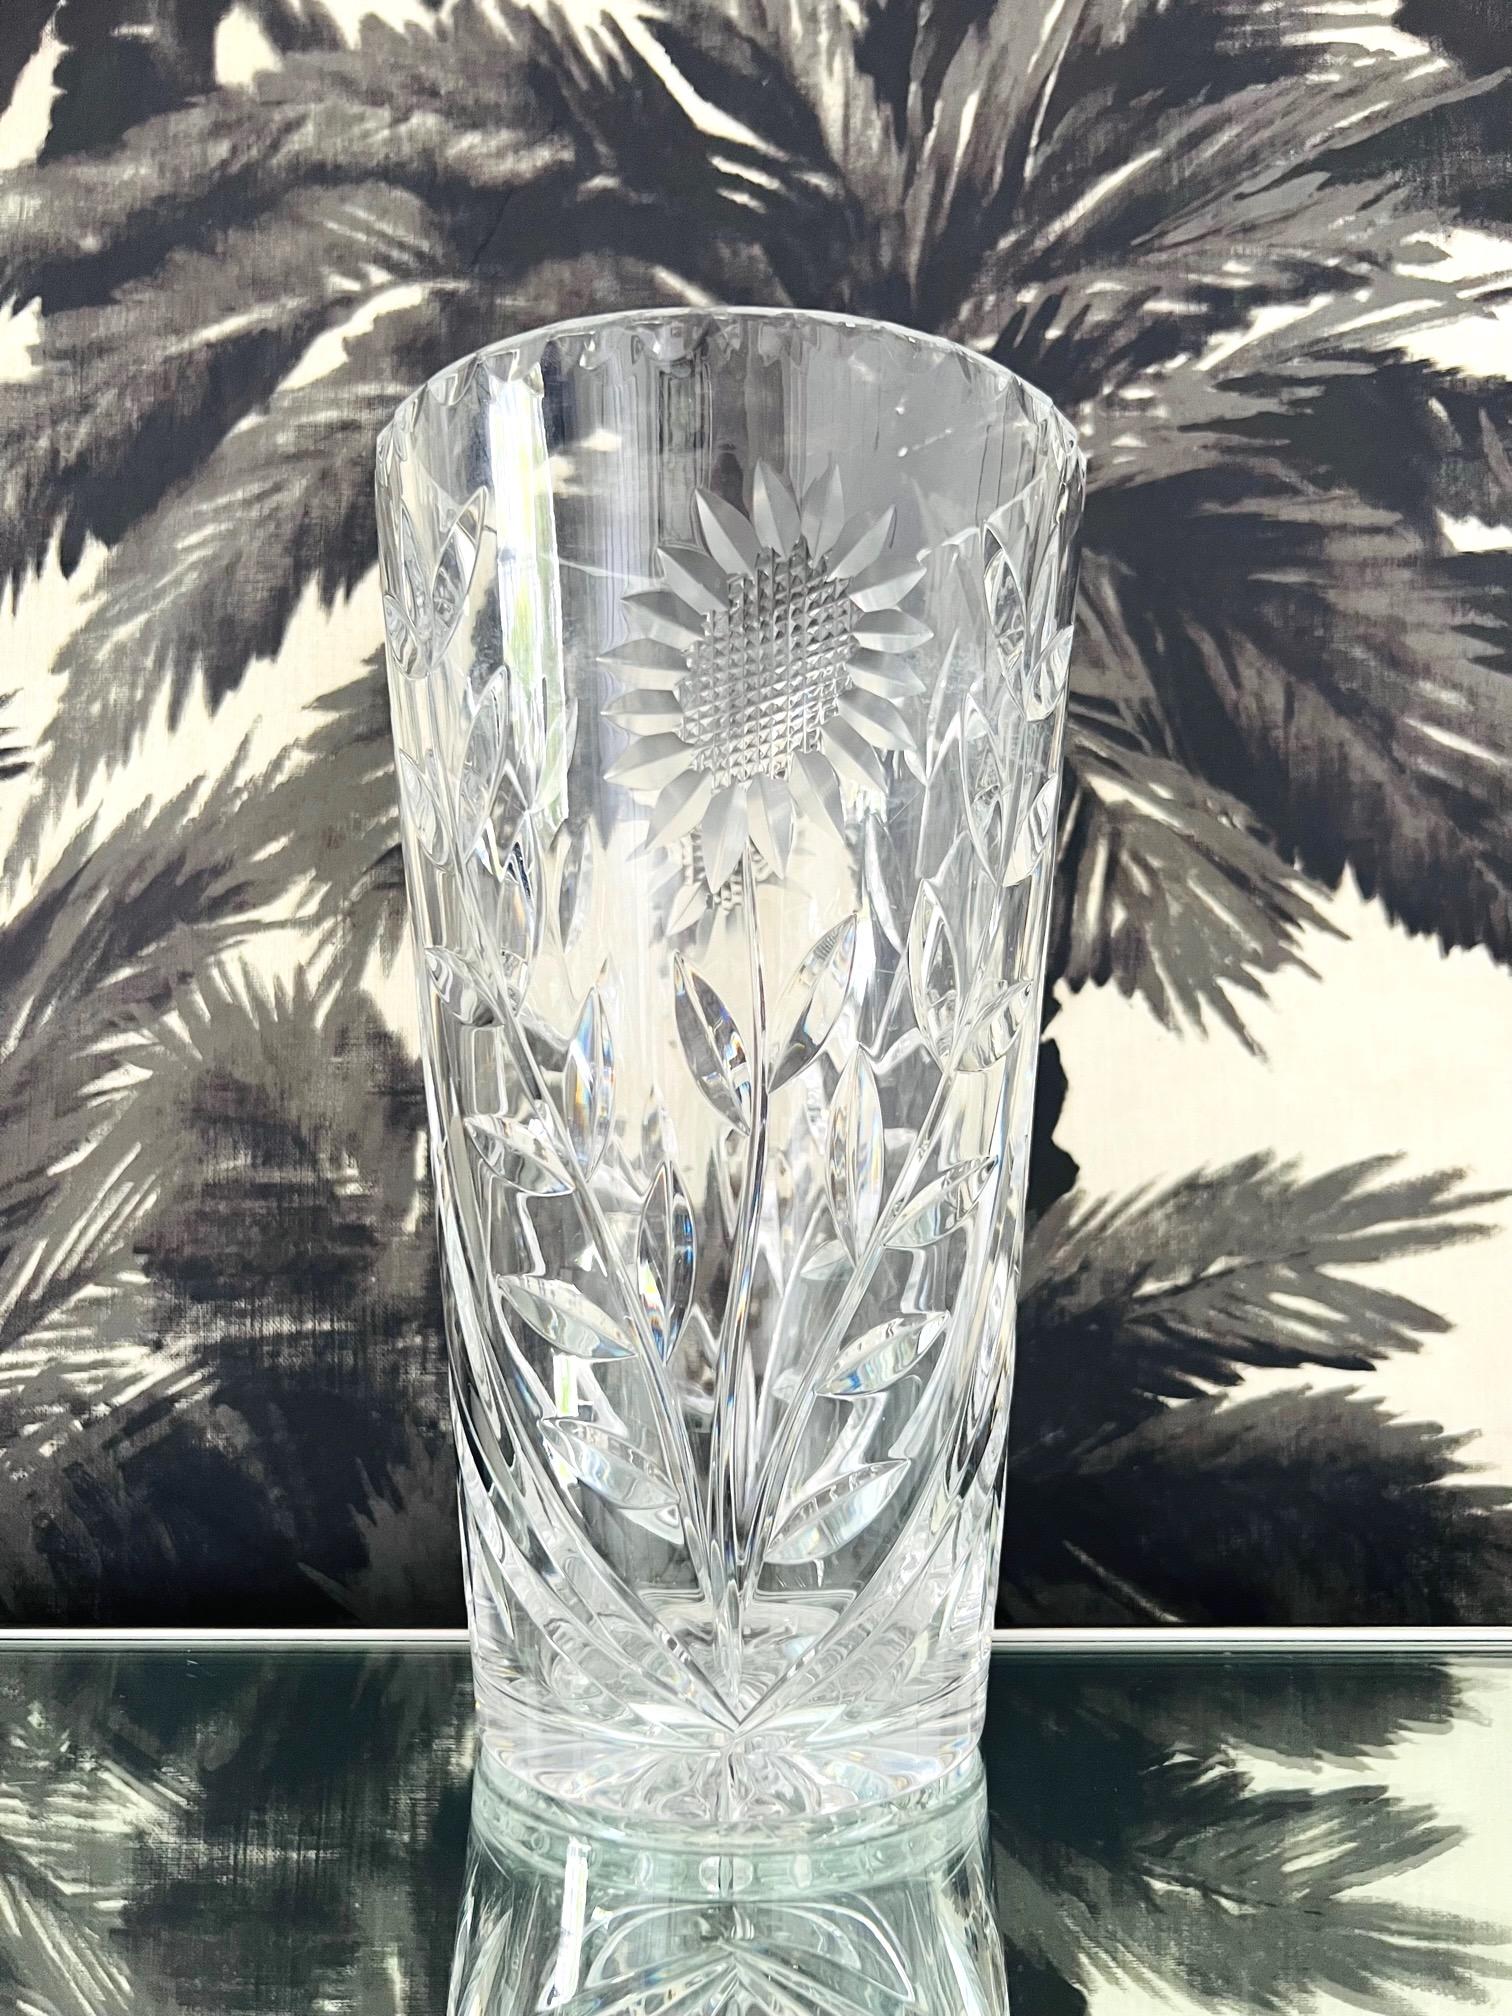 Large vintage Waterford Crystal vase with geometric cut glass designs and etched sunflower motifs reminiscent of the Art Deco era. The vase is heavy set in weight and features a unique chain beveled rim and starburst etchings on the underside.